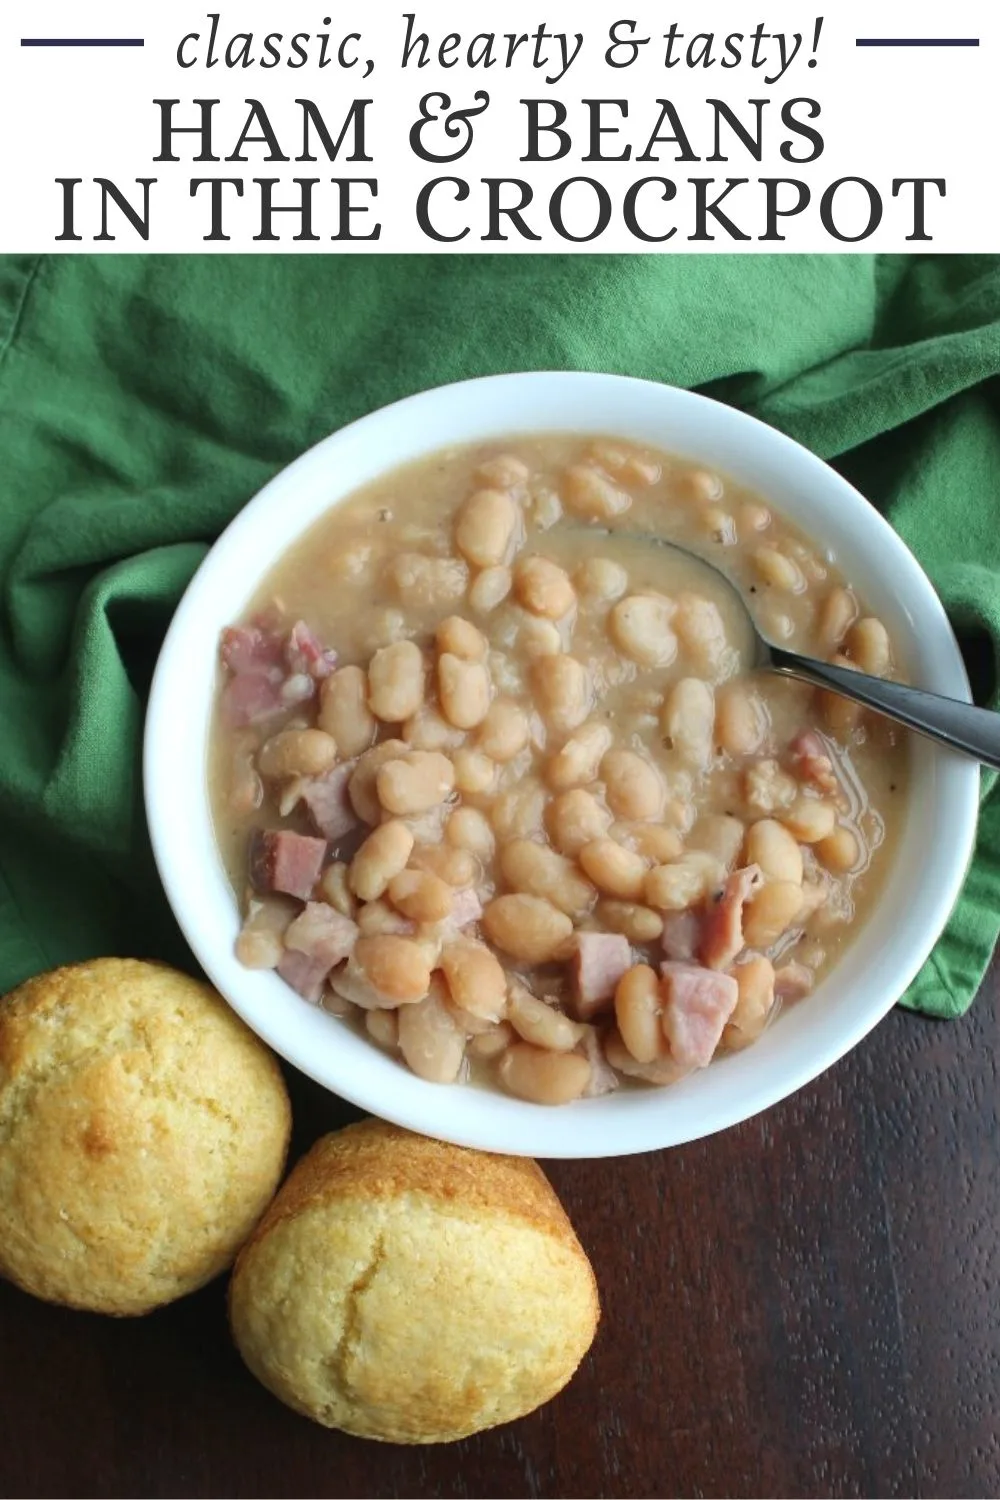 Slow cooker ham and bean soup is a perfect cold weather meal. It is especially great if you have some leftover ham to use up. Make some ham and beans in the crockpot and some cornbread today.